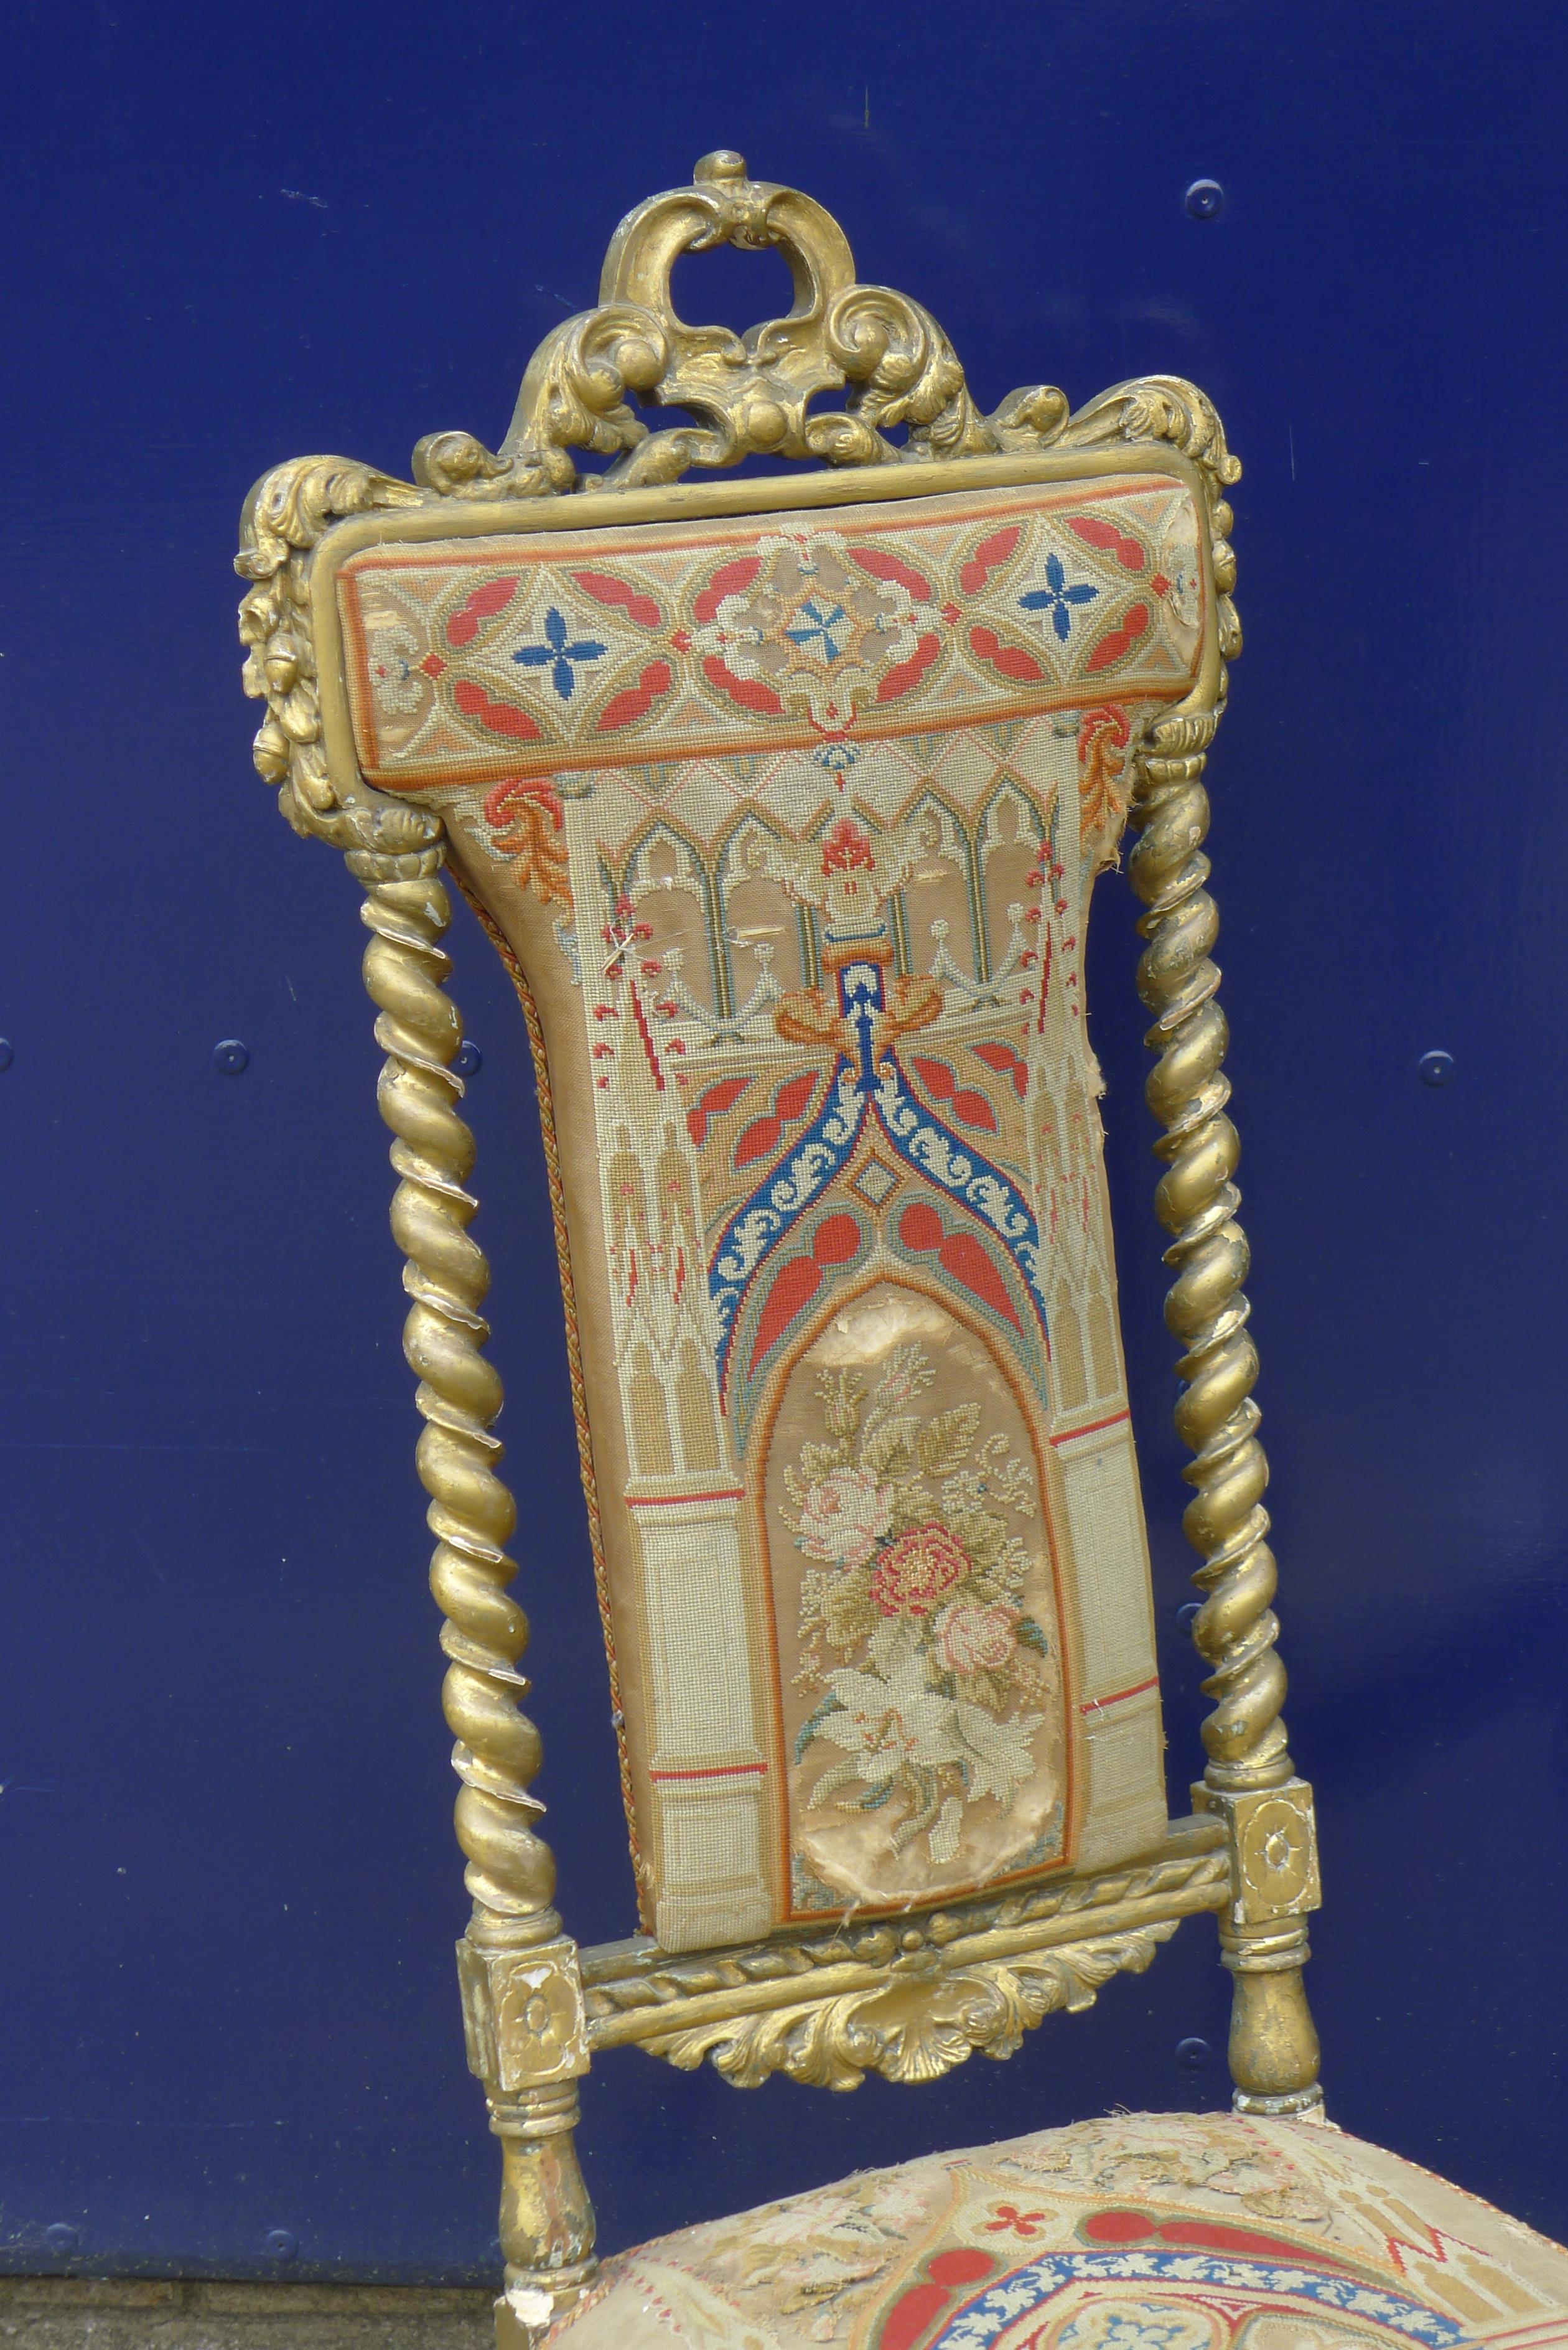 A Victorian prie dieu gilt chair with needlework upholstery. 117 cm high. - Image 2 of 6